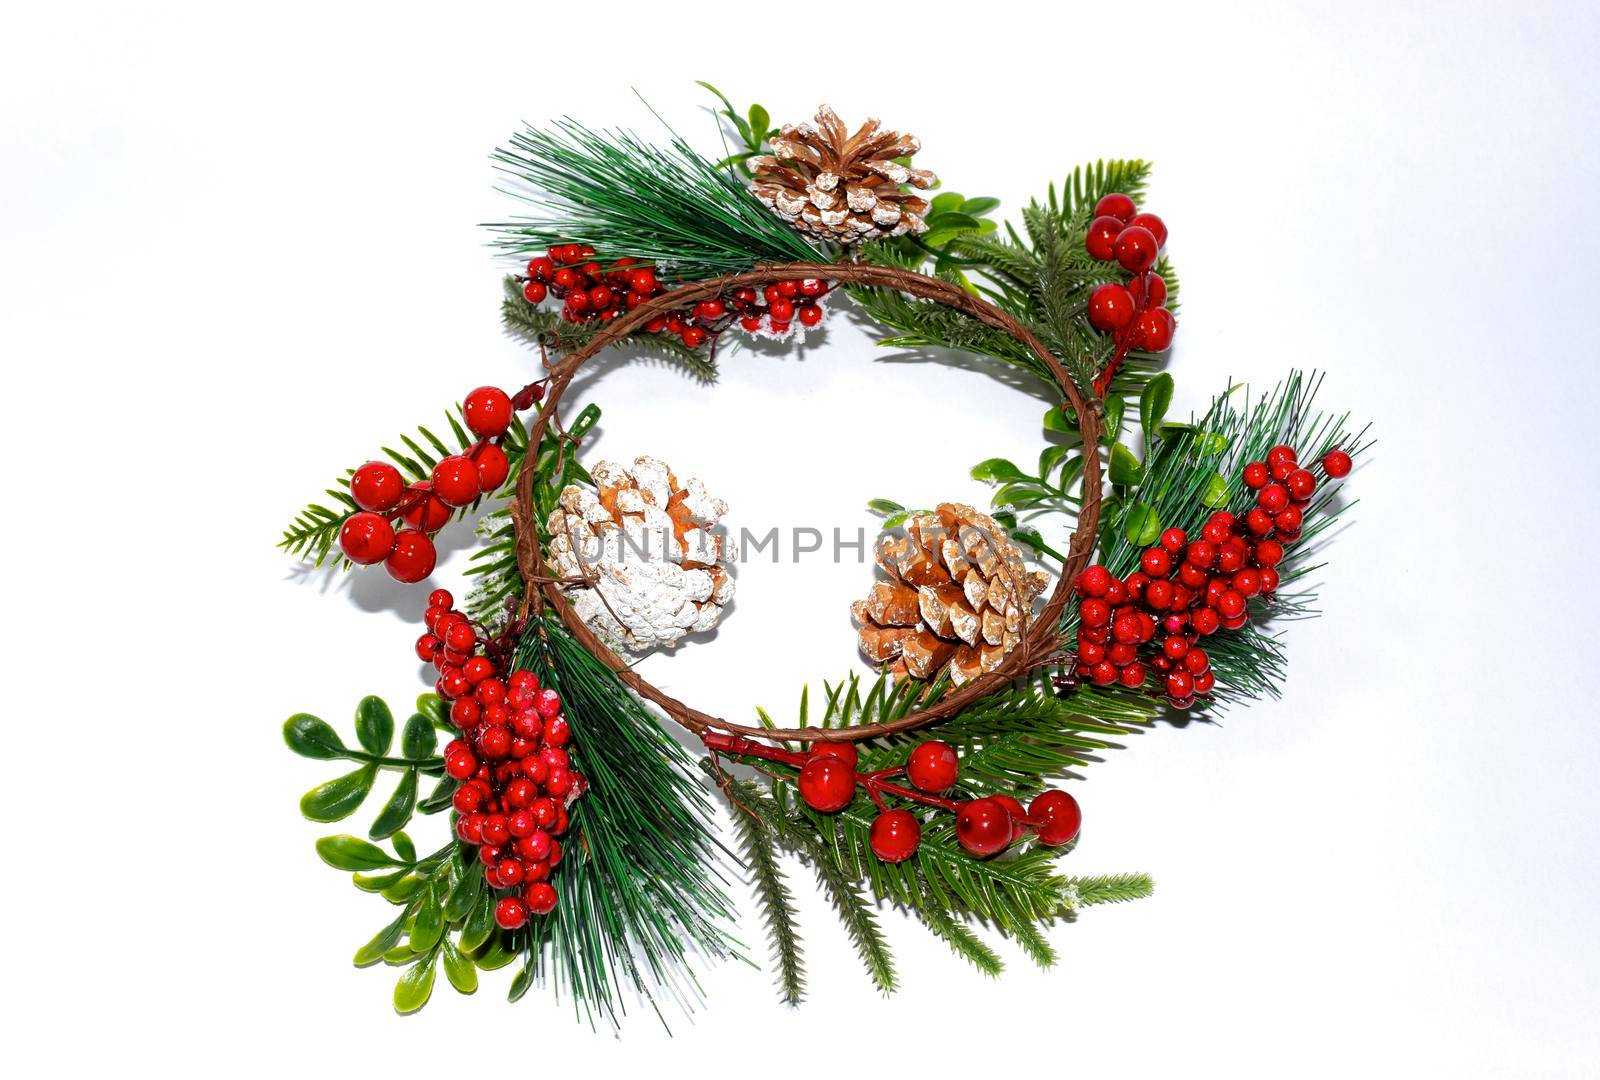 Decorative Christmas wreath with berries and cones by bybyphotography